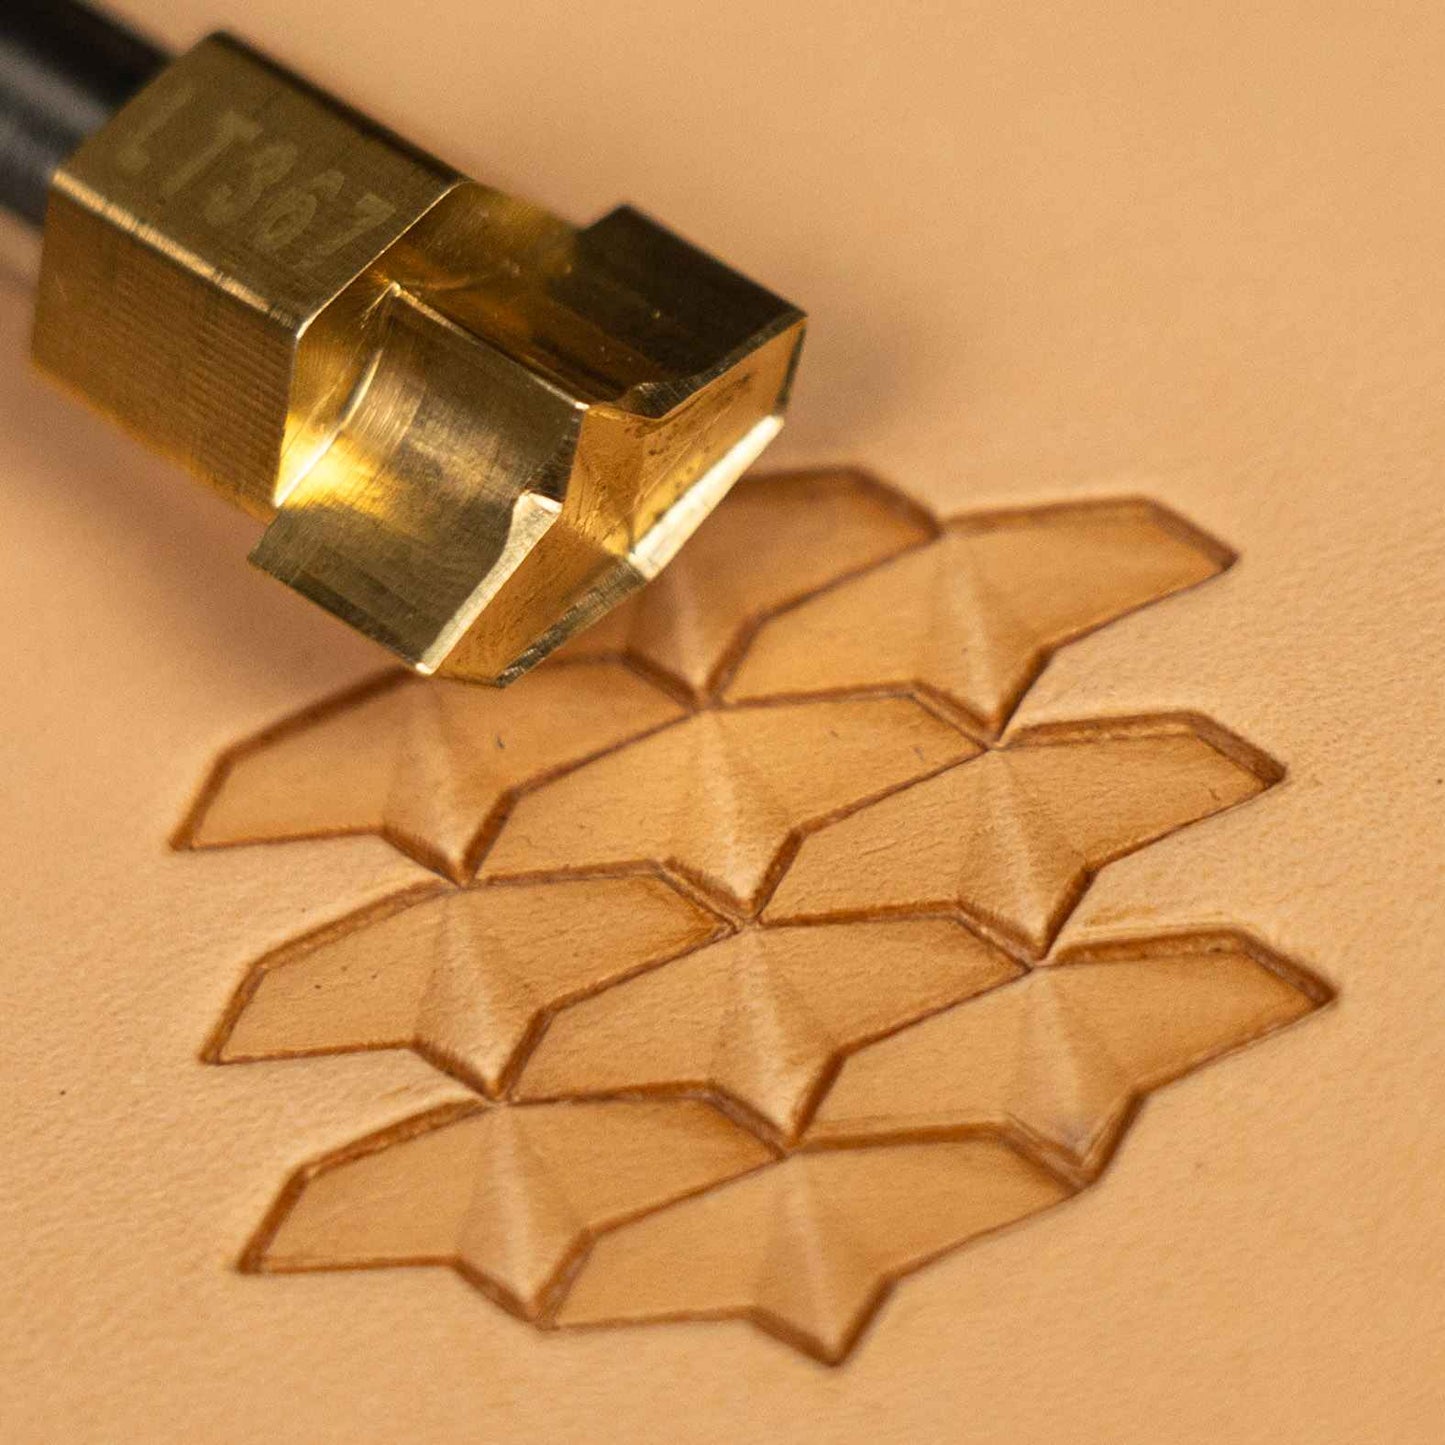 LT367 Premium Leather Stamping Tools for Professional Crafters-15x8mm size